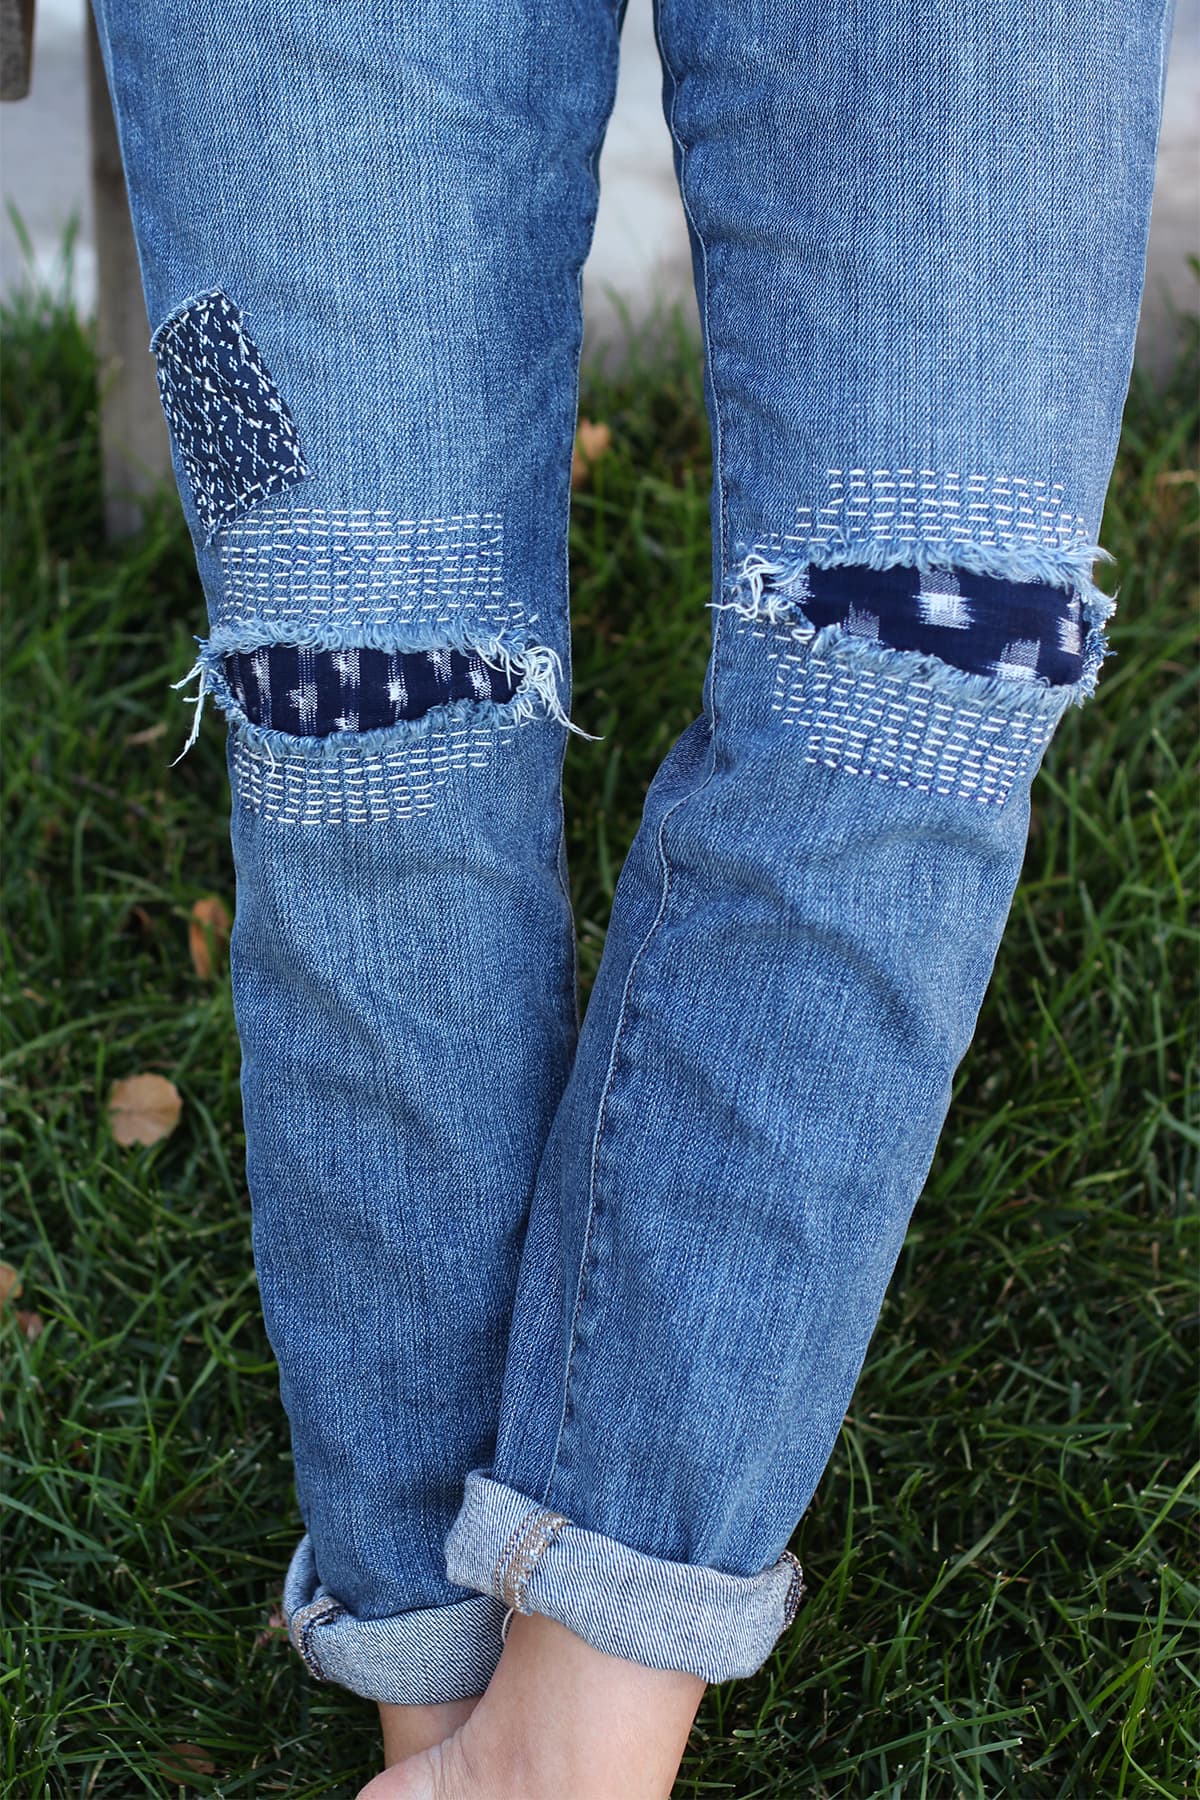 How to Make Sure Ripped Jeans Don't Get Damaged in the Wash